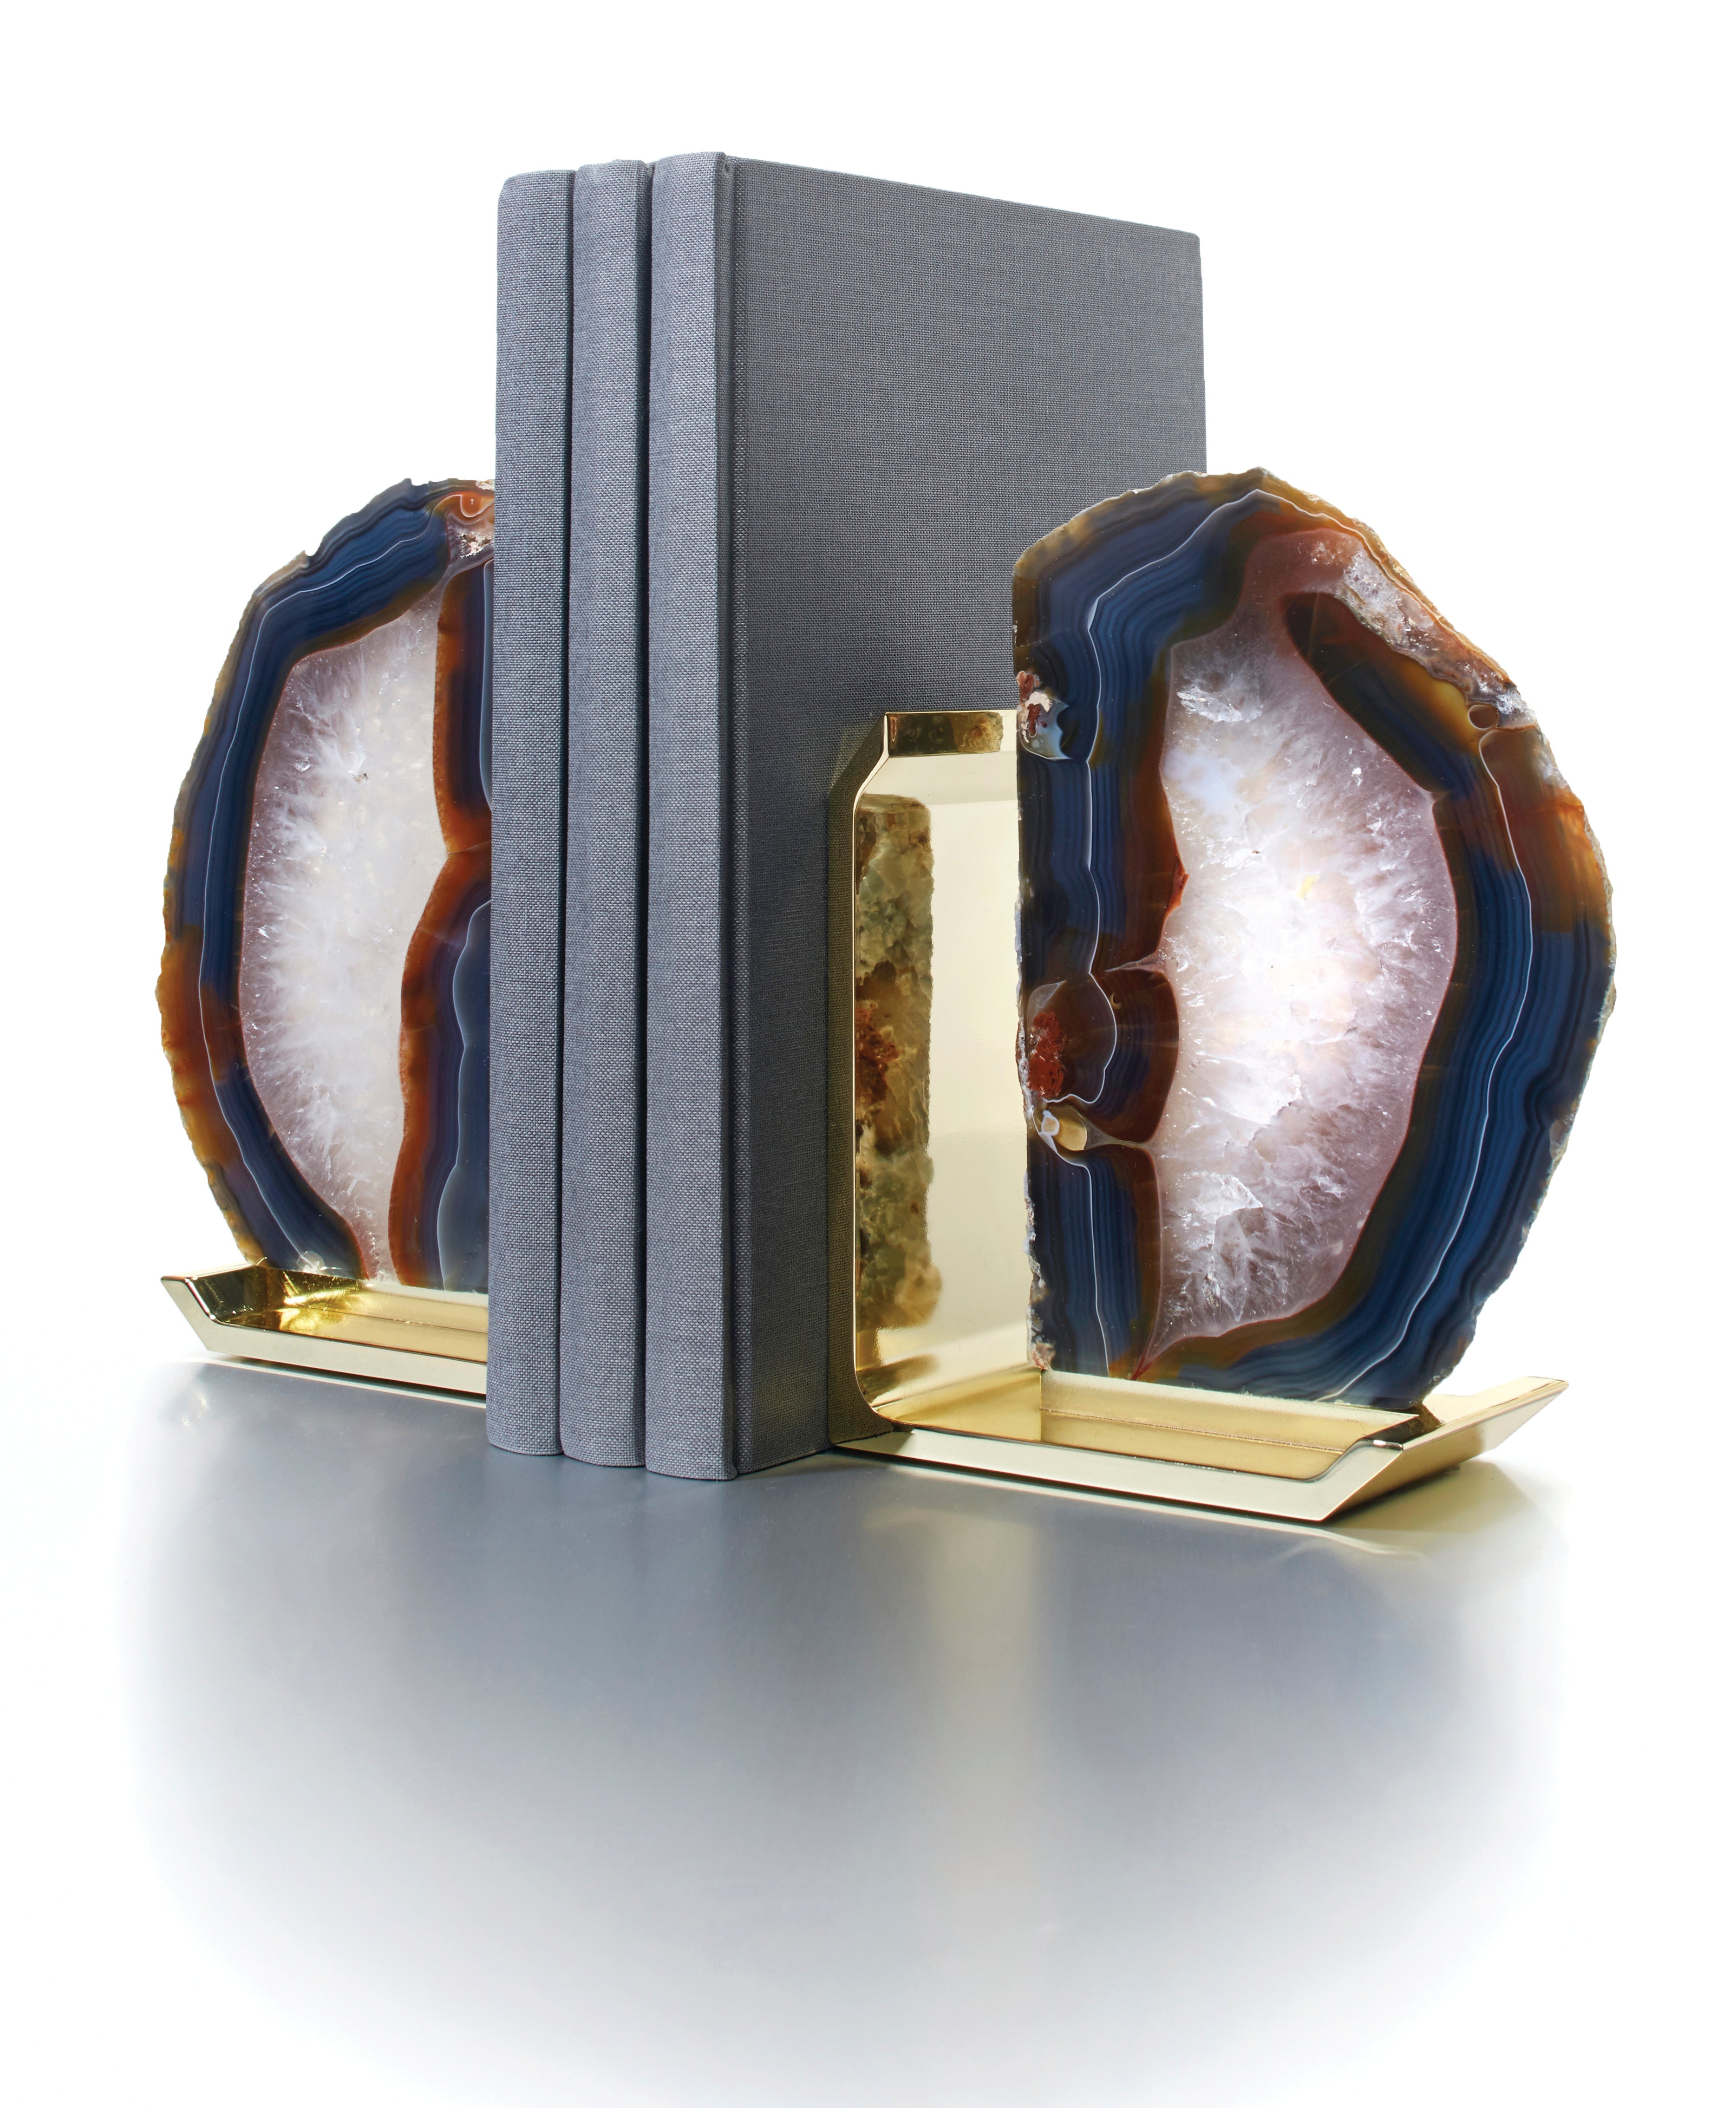 Fim Bookends, Agate & Gold, Set of 2 by ANNA New York